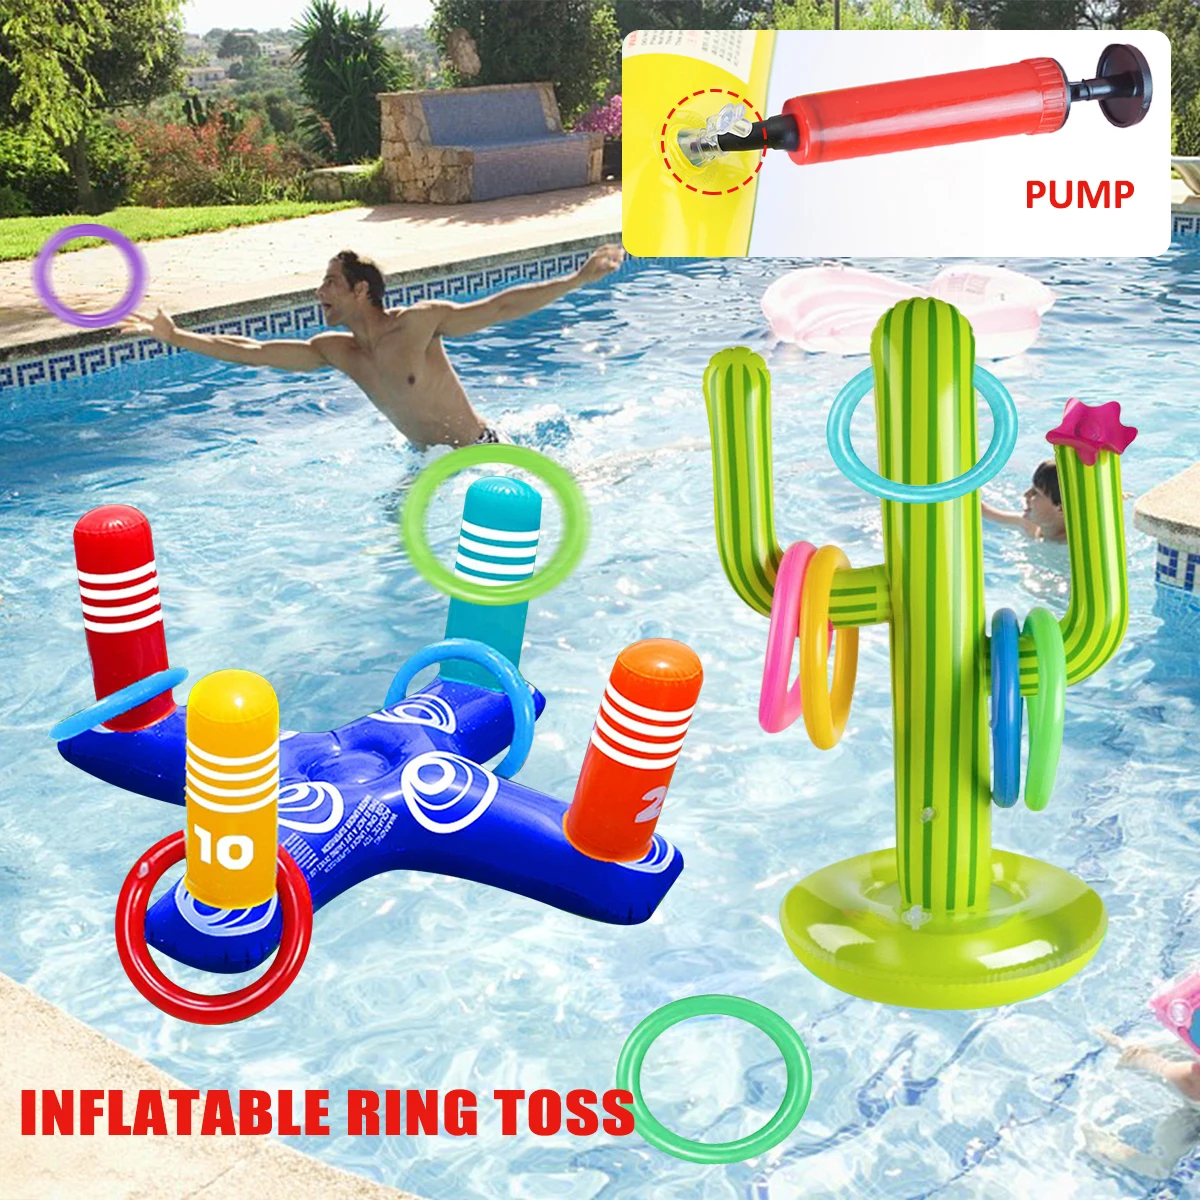 Inflatable Cactus Ring Throwing Pool Toy Game Set Summer Outdoor Pool Beach - £11.14 GBP